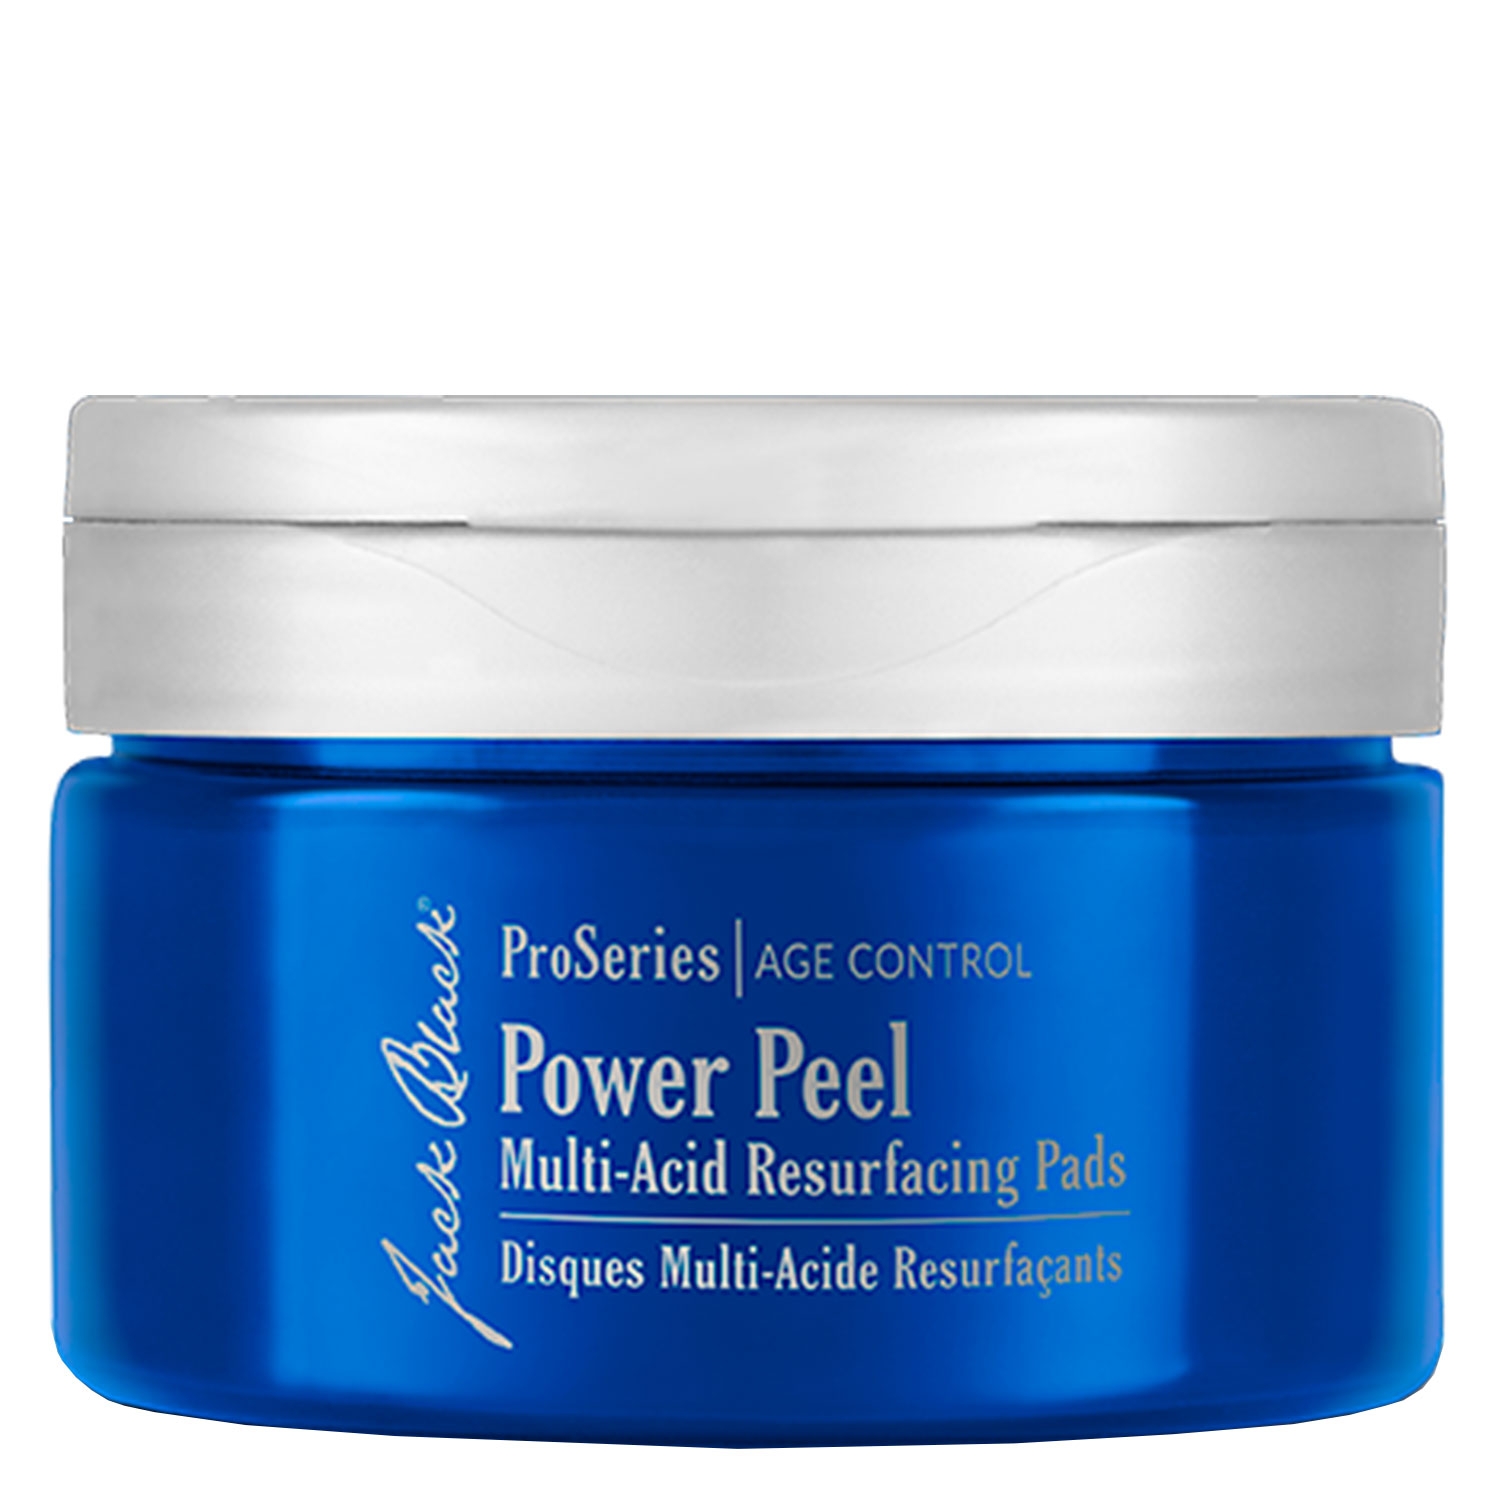 Product image from ProSeries Age Control - Power Peel Pads